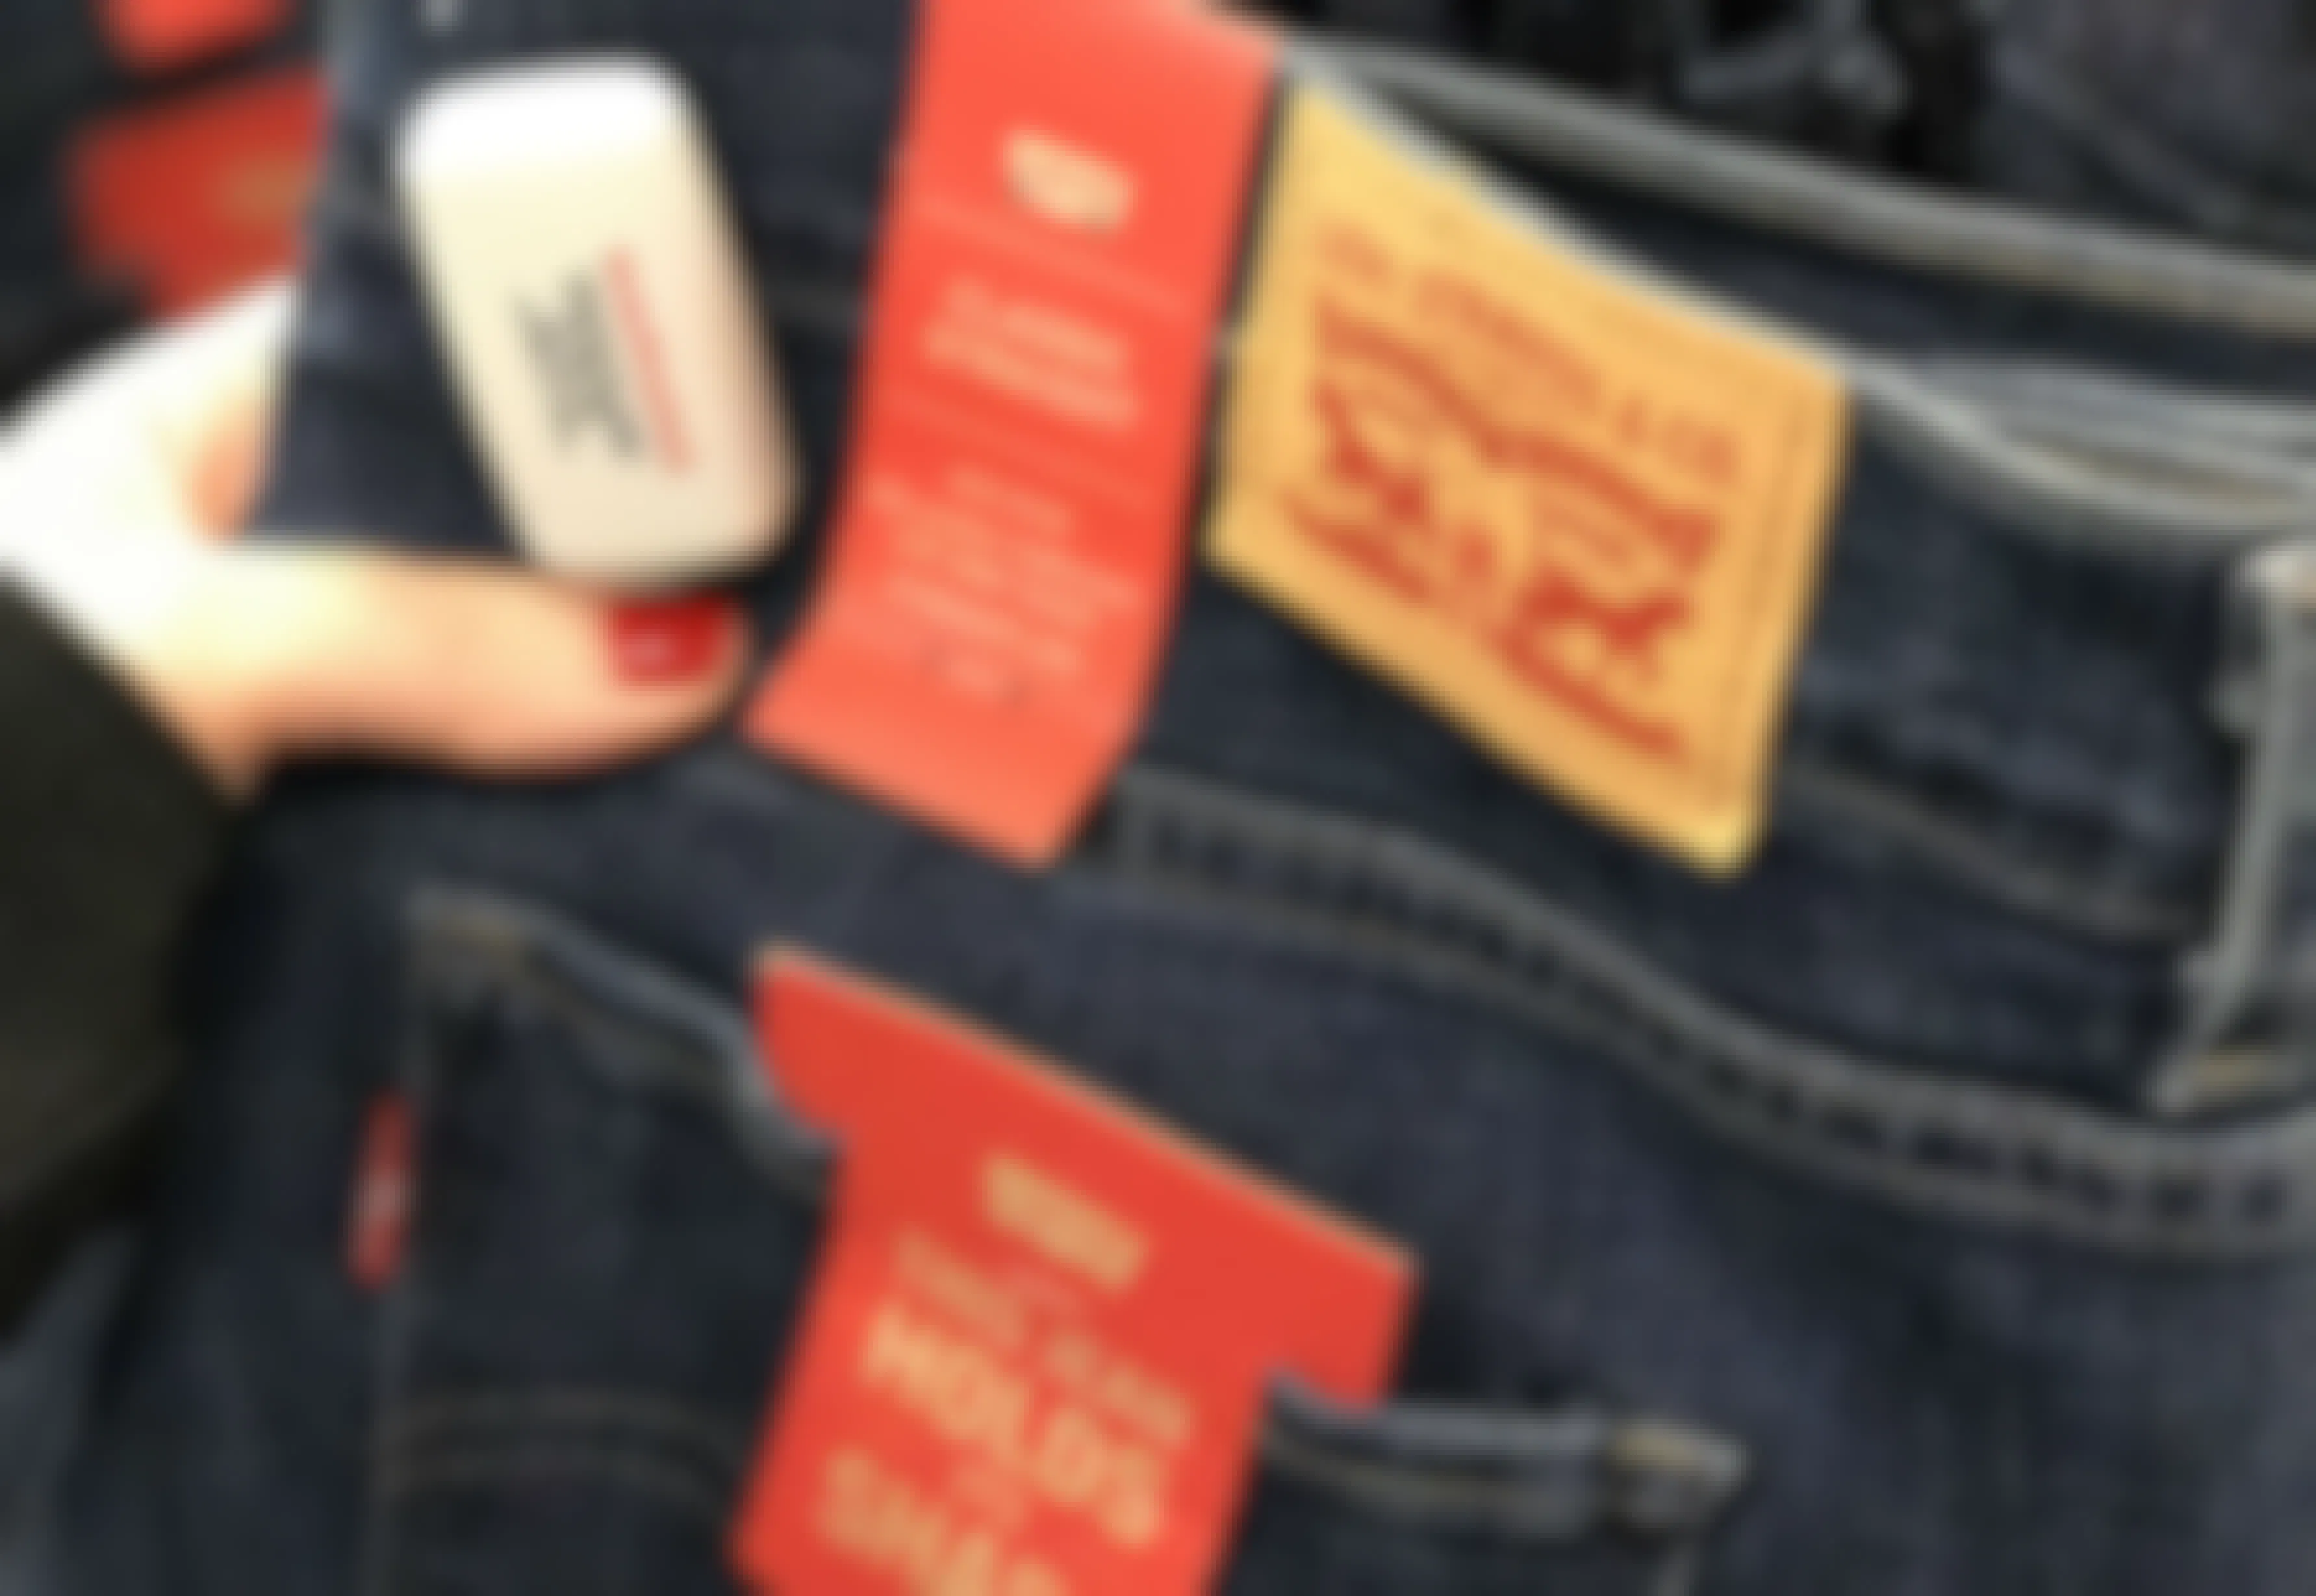 8. Buy Levi's 501 jeans at Levi.com or Nordstrom Rack for up to 55% savings.